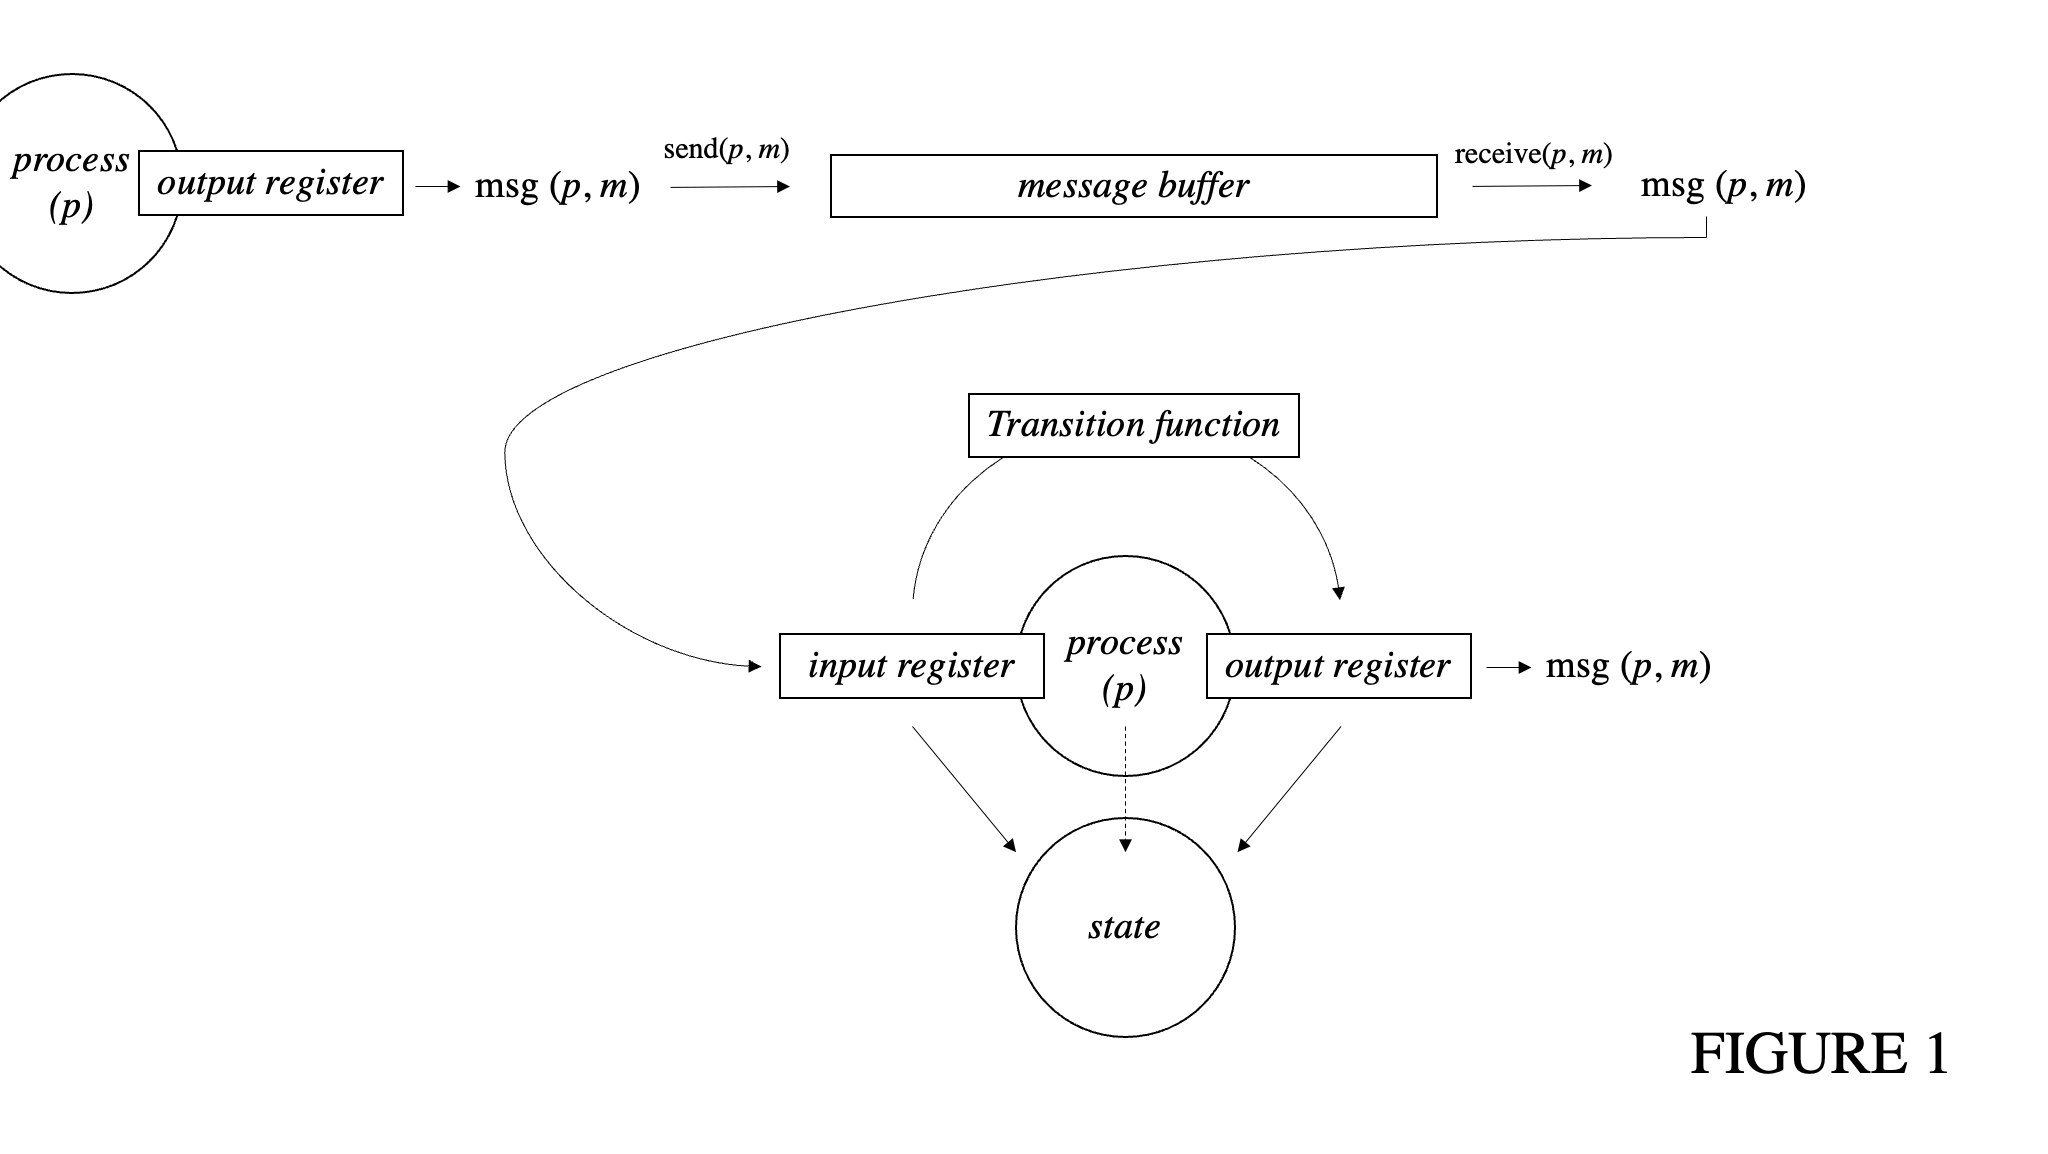 FIGURE 1. Concept of process, and message system.